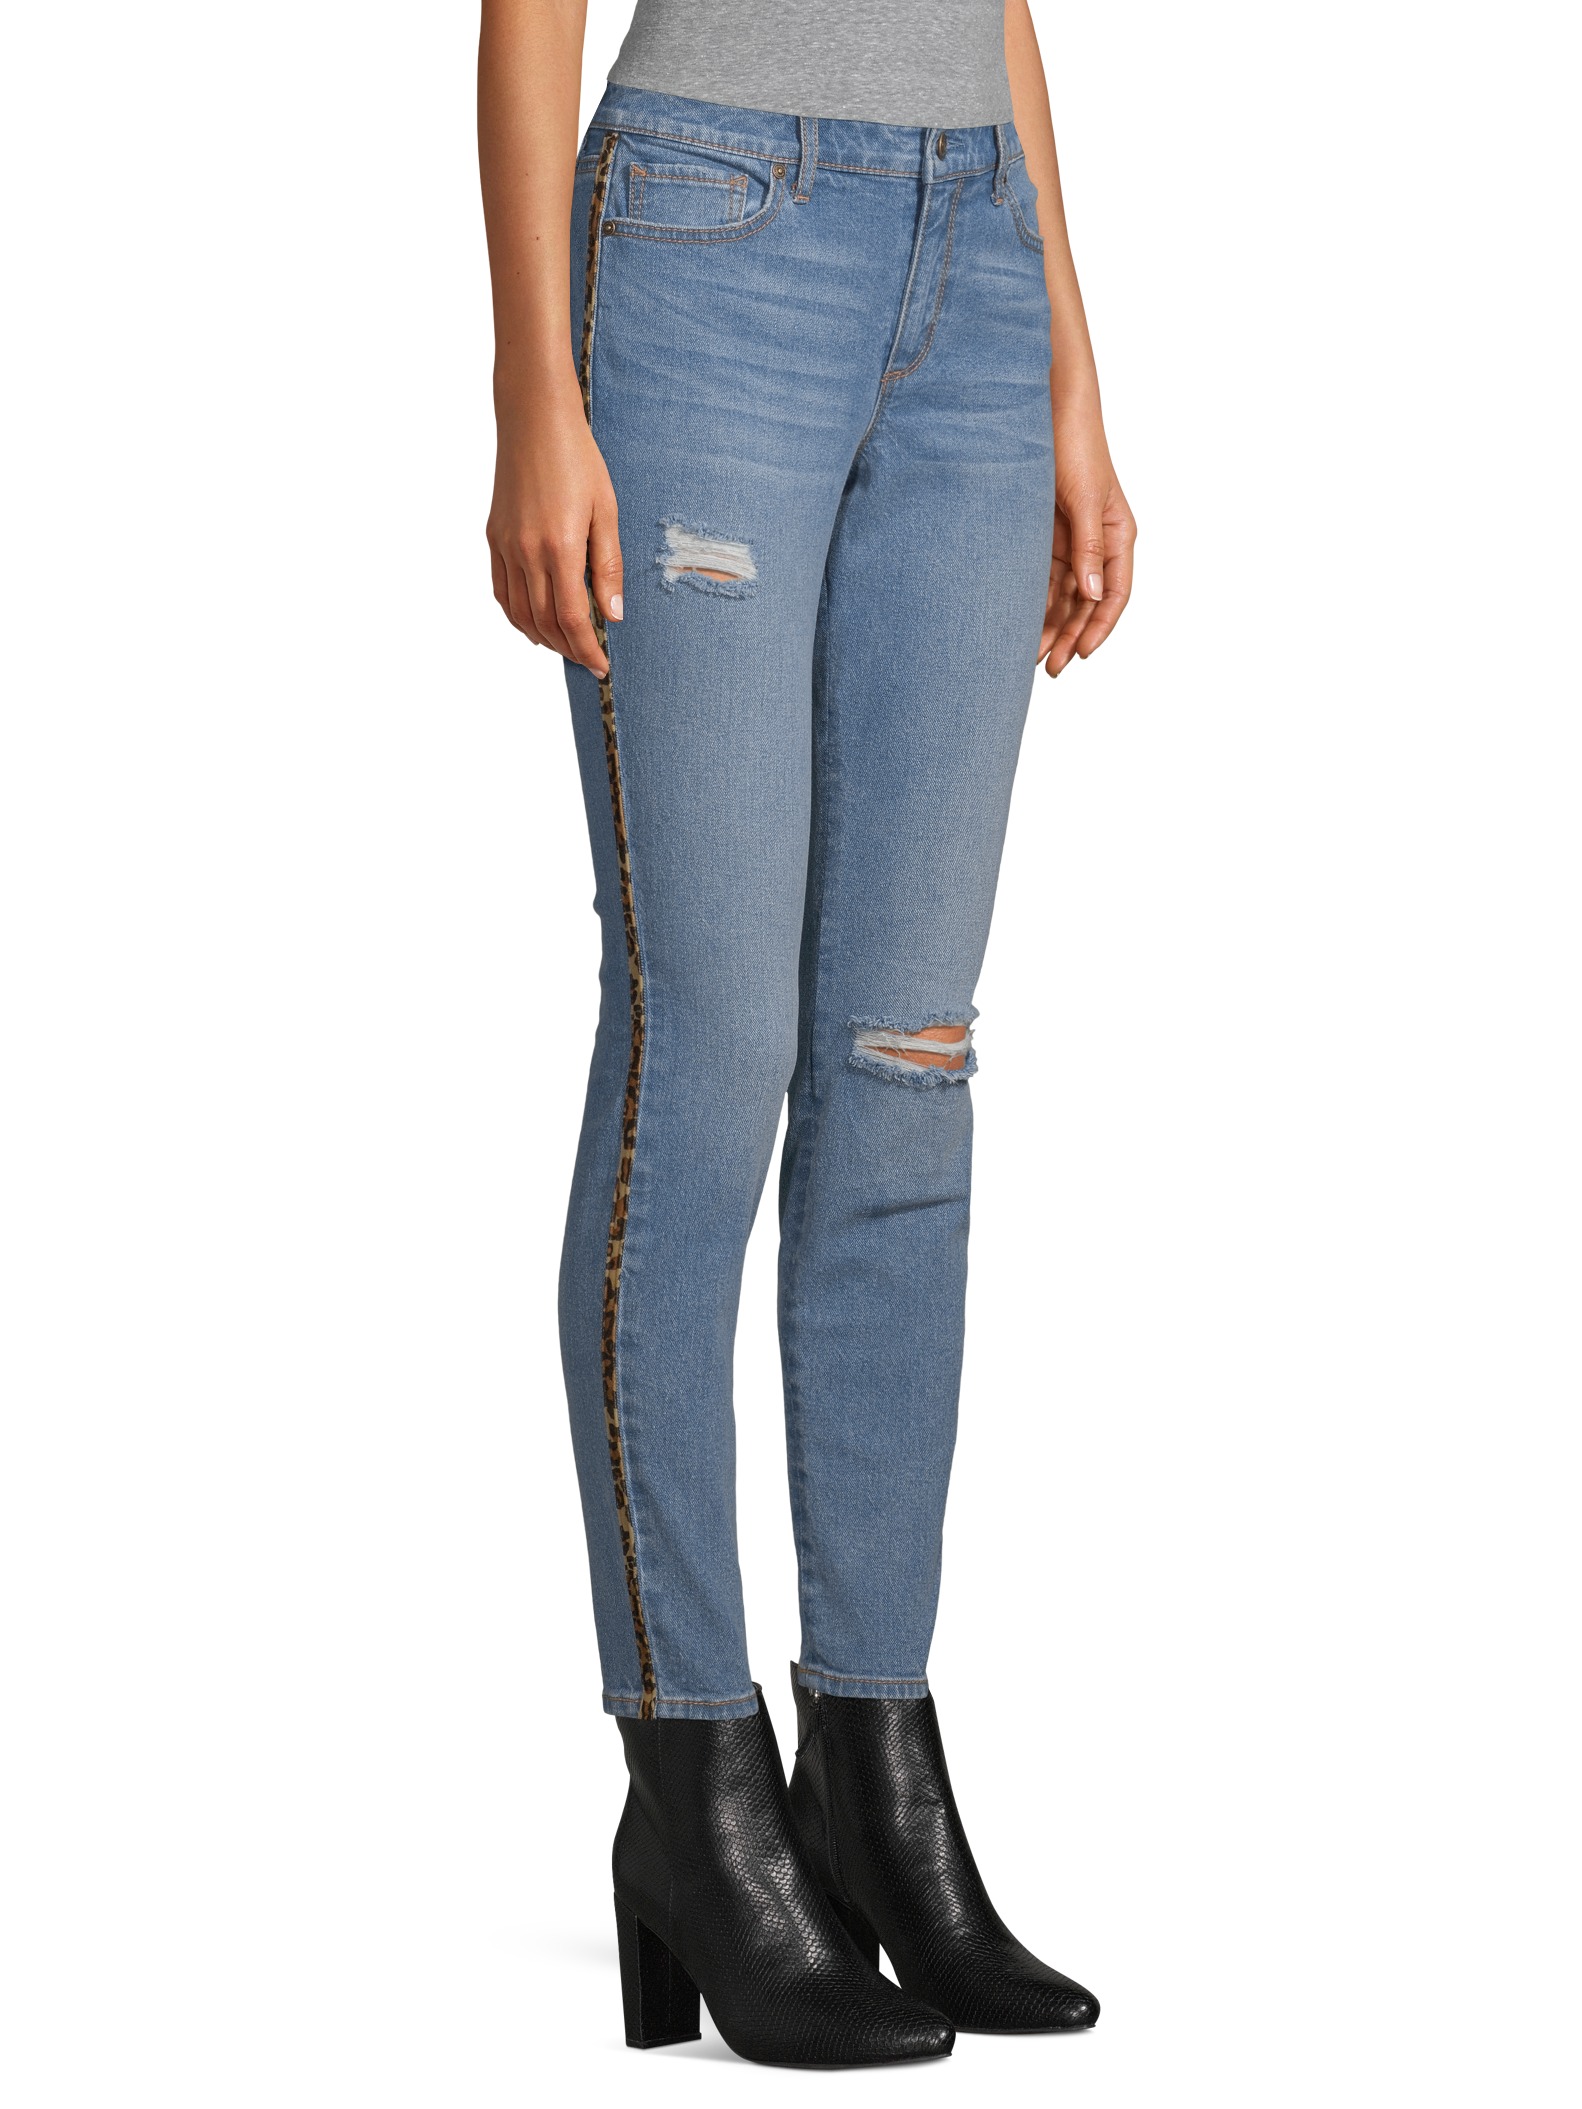 Scoop Women's Skinny Ankle Jeans with Leopard Stripe - image 4 of 7